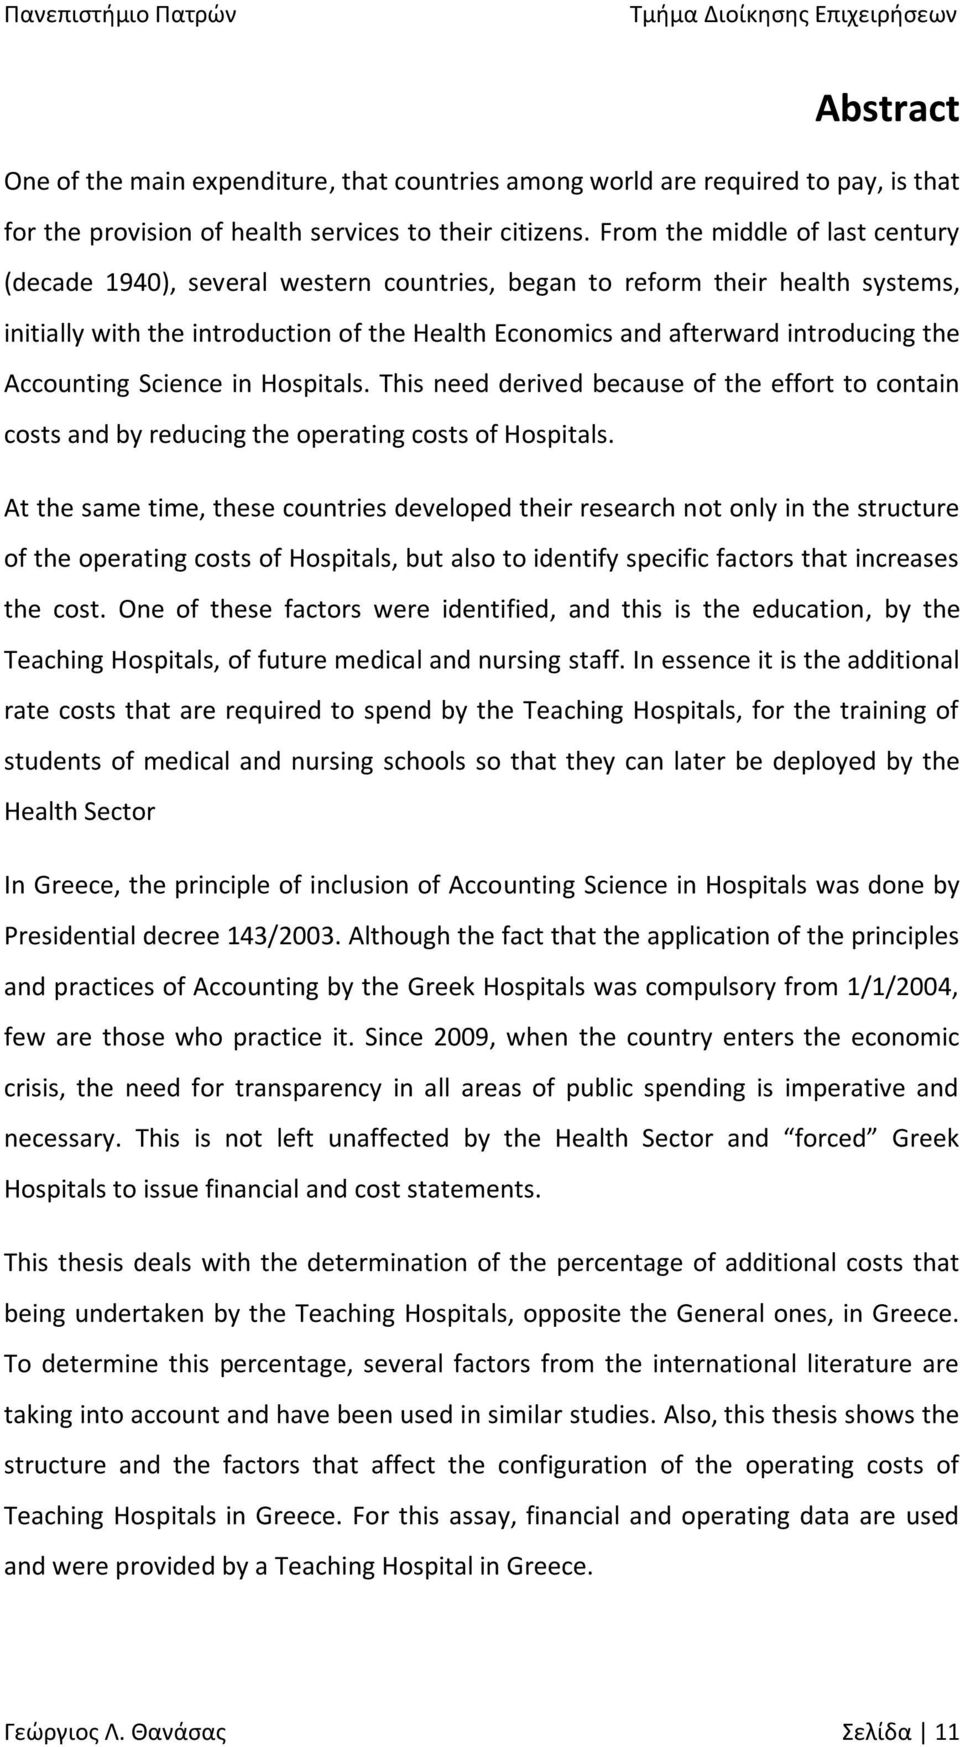 Accounting Science in Hospitals. This need derived because of the effort to contain costs and by reducing the operating costs of Hospitals.